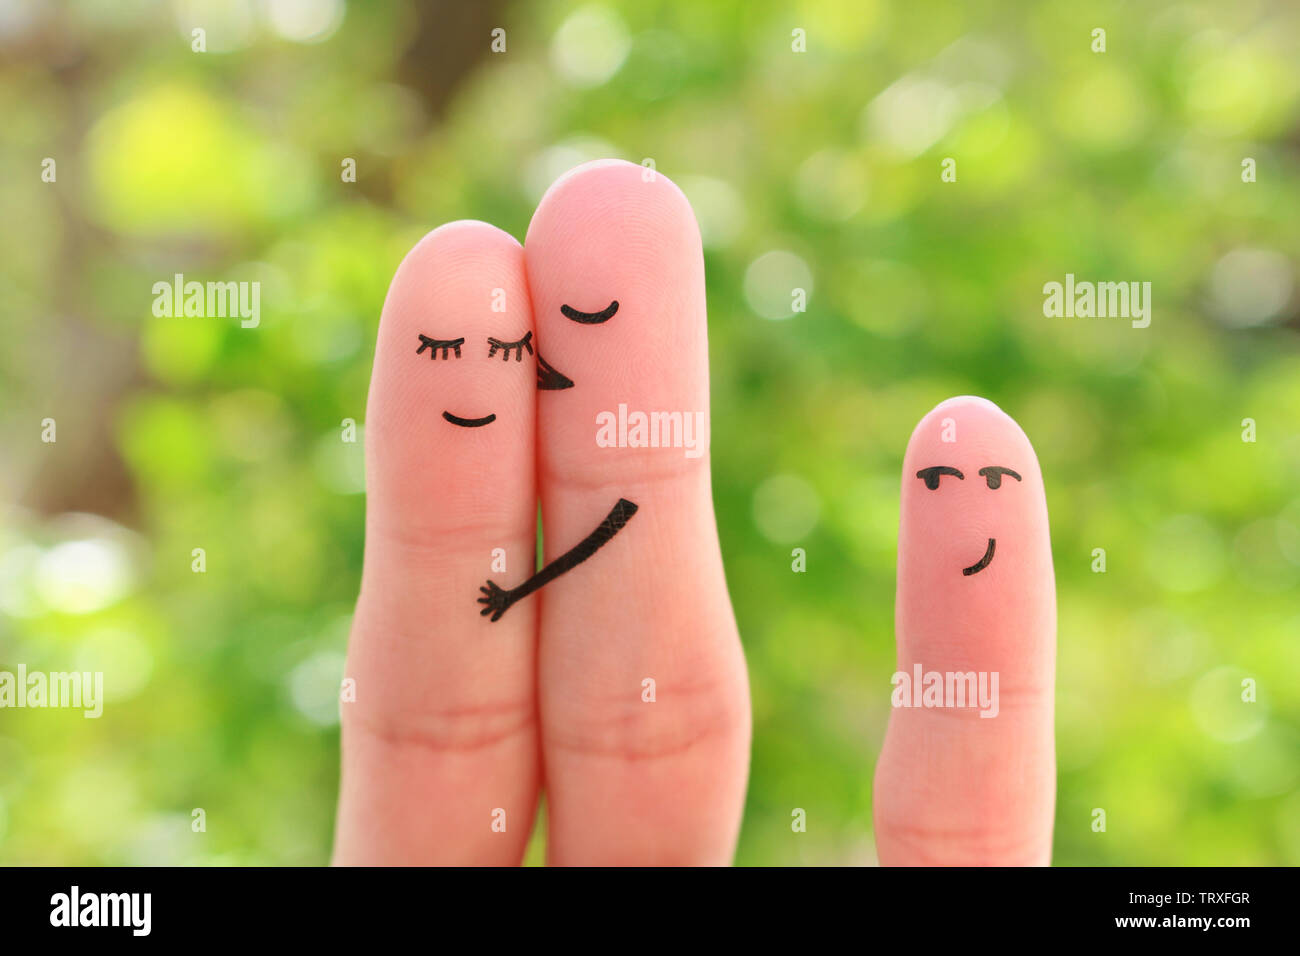 Fingers art of happy family. Concept of couple kisses, child glances after them. Stock Photo